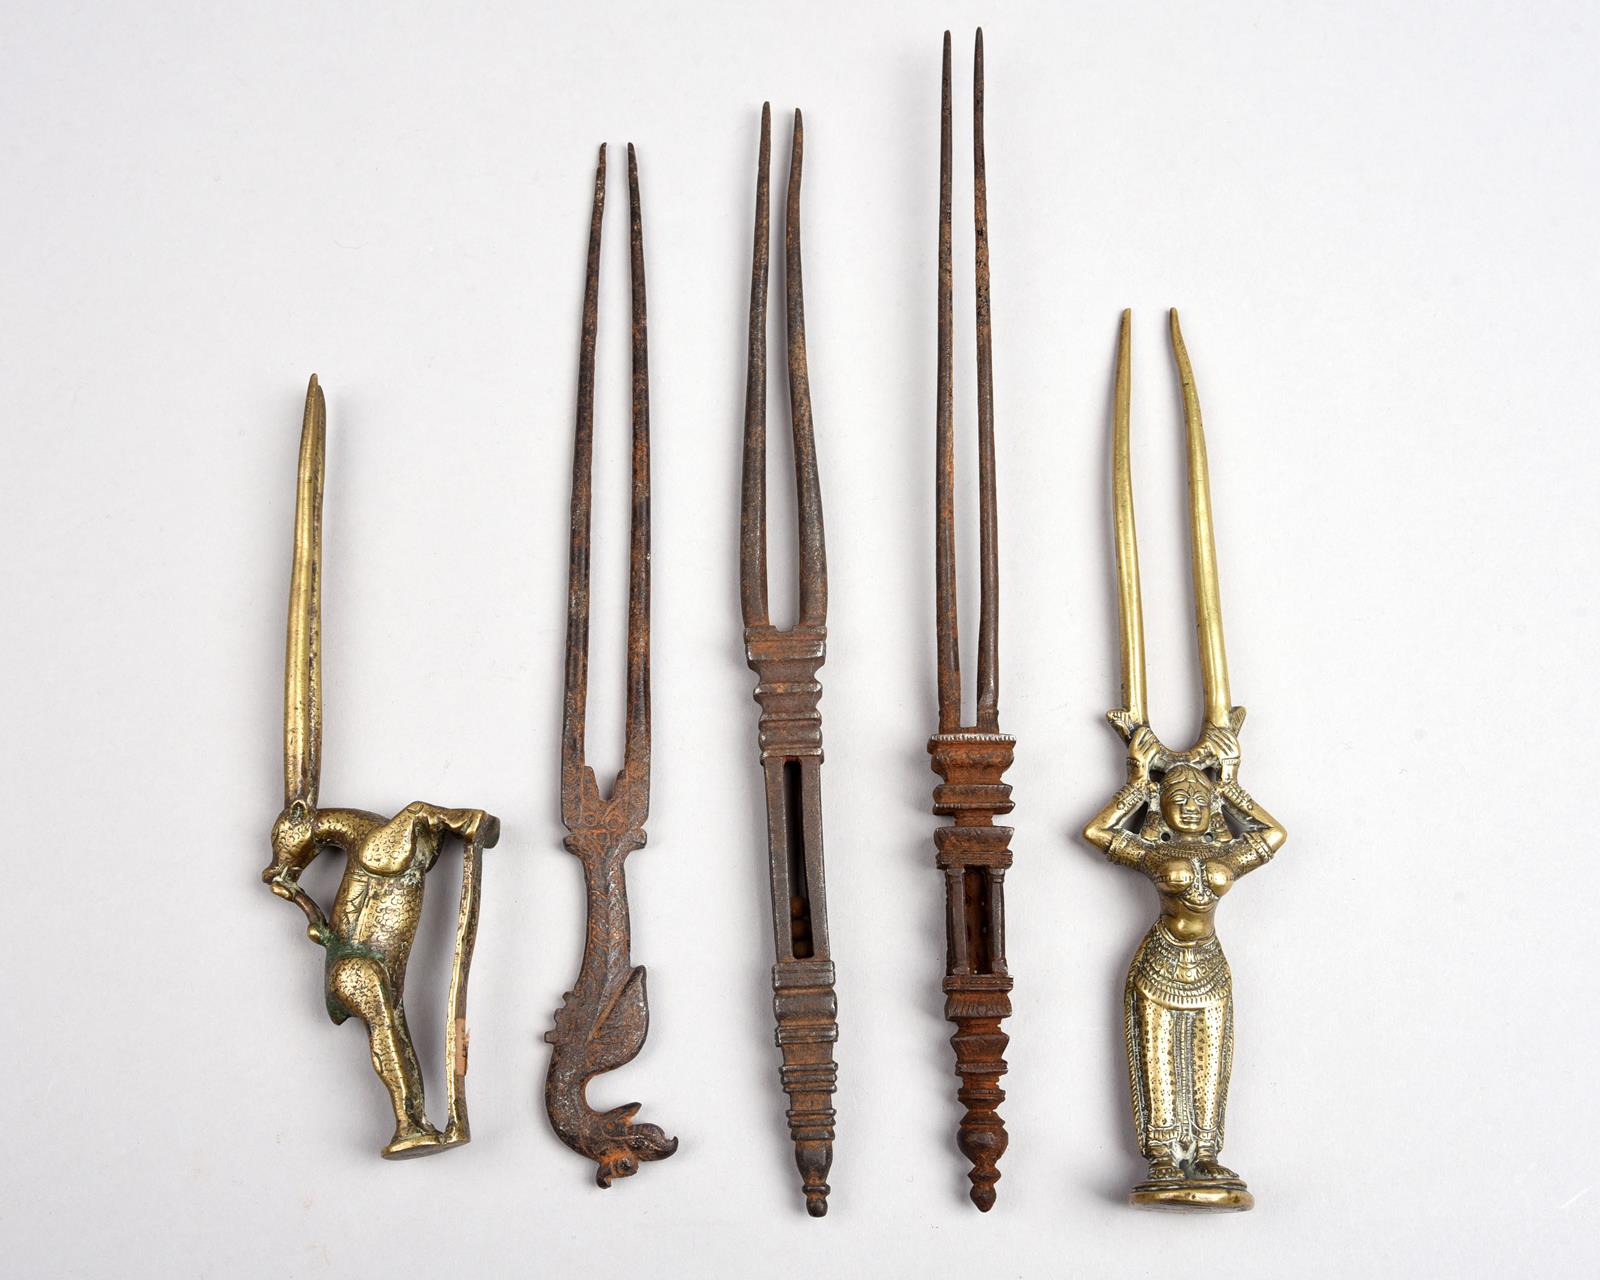 Five Indian hairpins brass and steel, all with two prongs, including a standing female figure, a